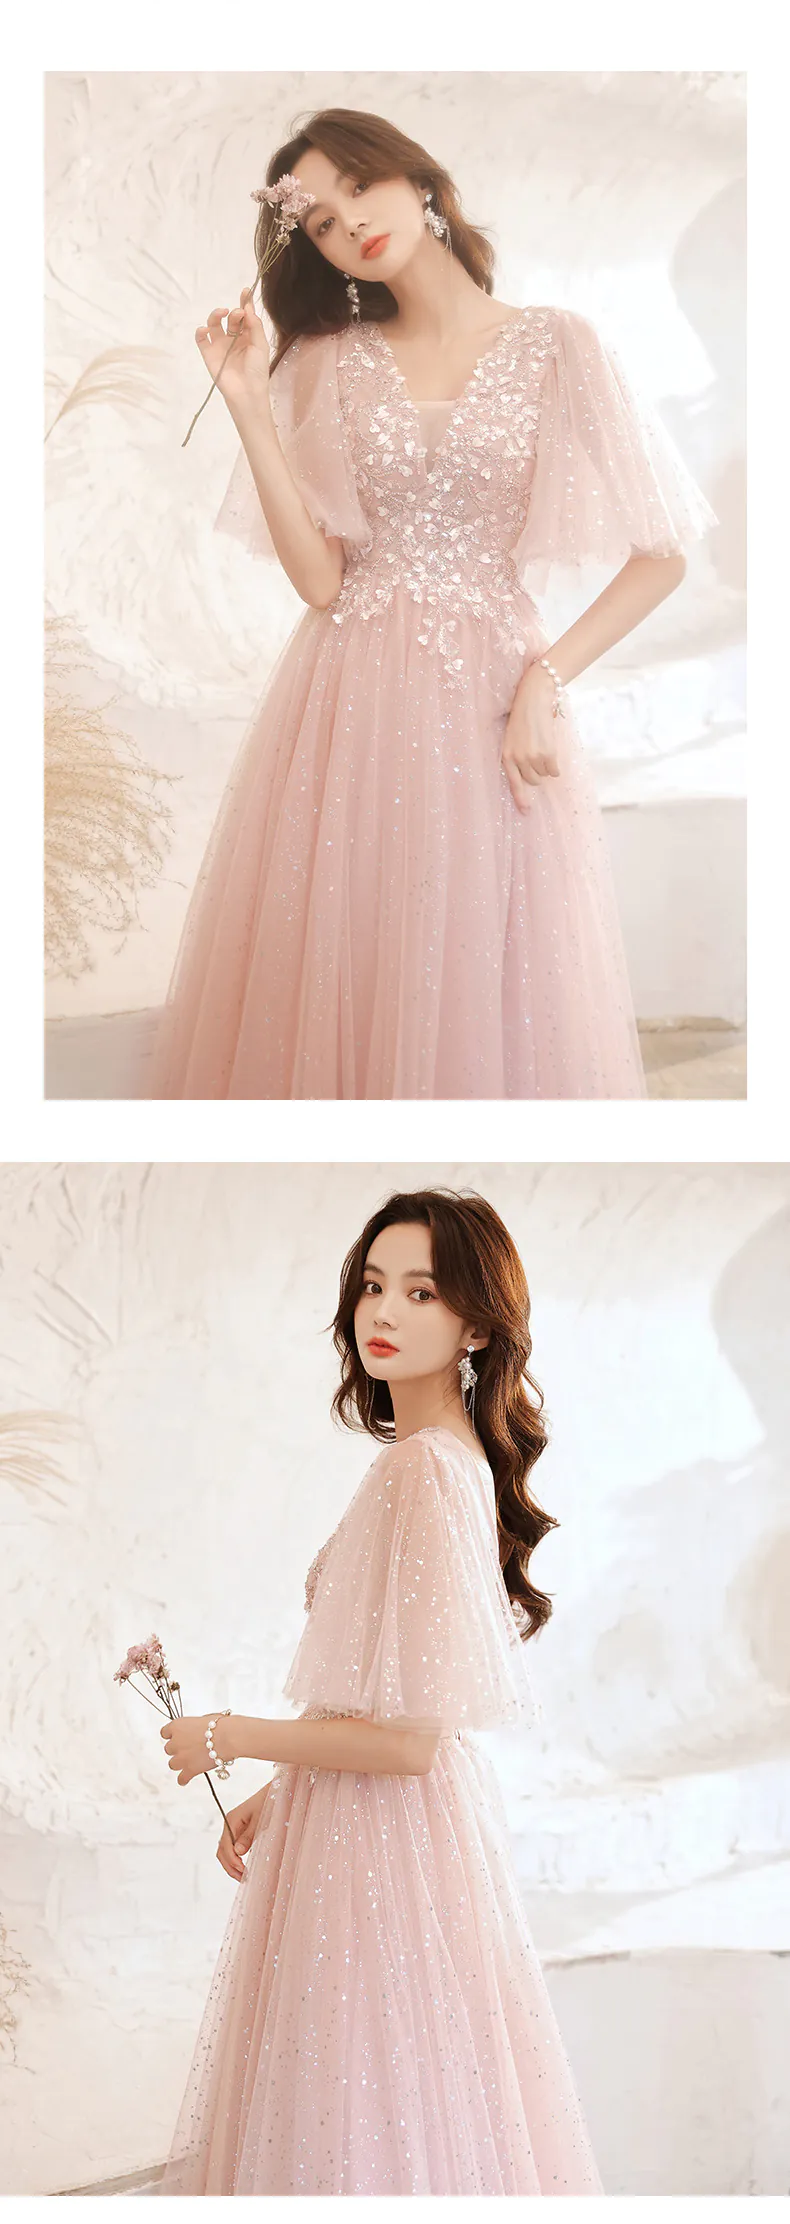 Classy-Flutter-Sleeve-Pink-Tulle-Formal-Evening-Party-Dress-Ball-Gown12